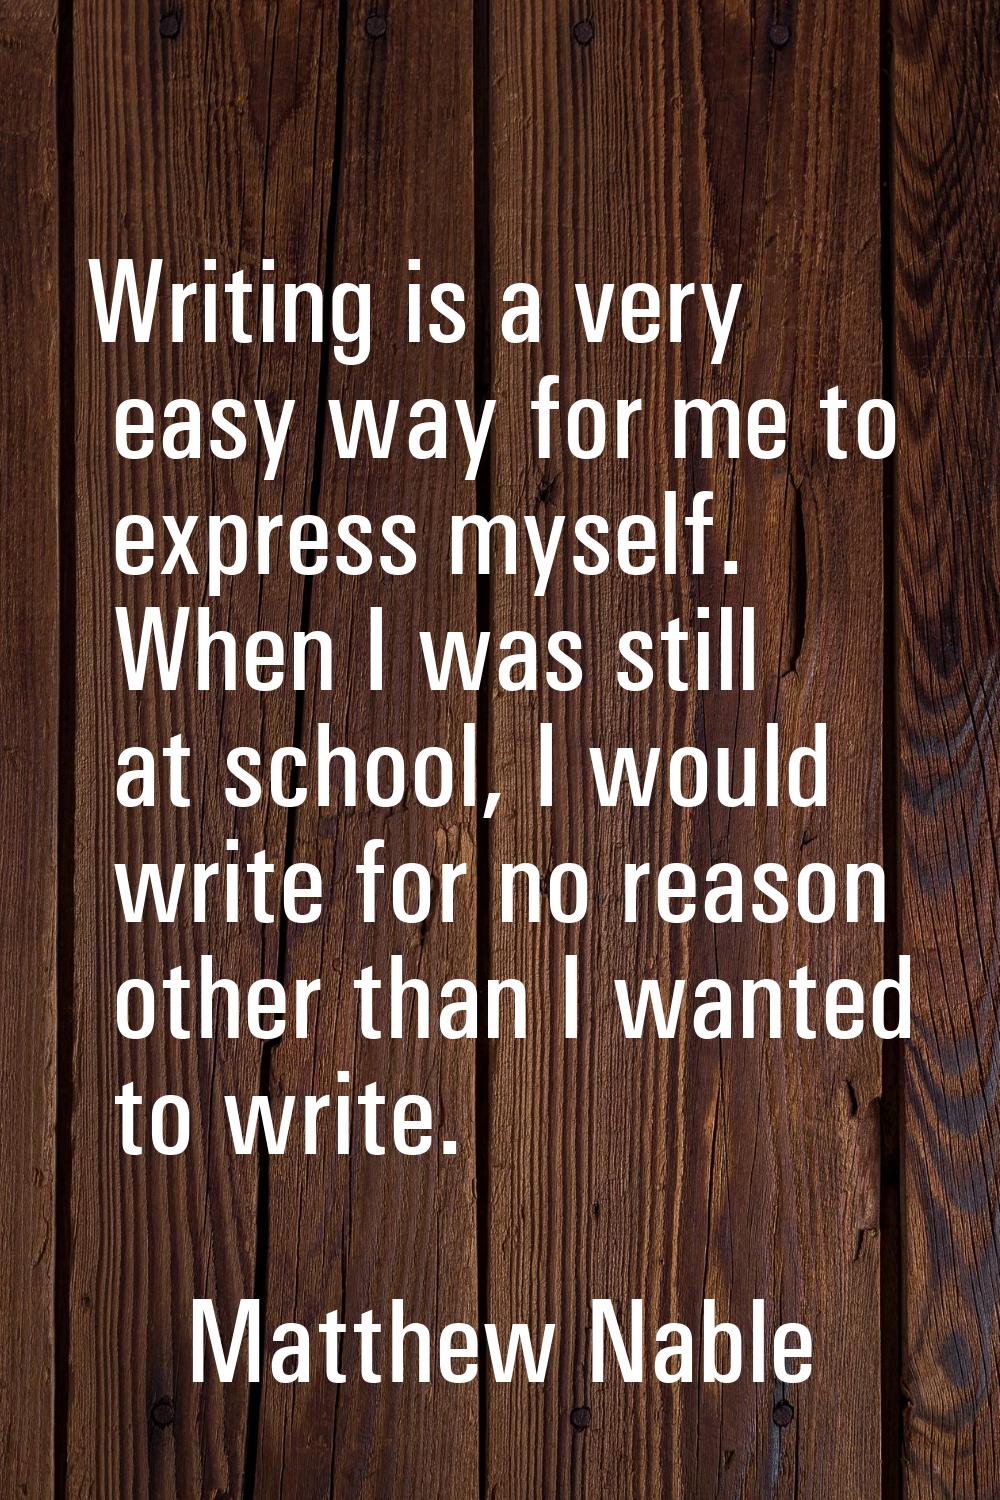 Writing is a very easy way for me to express myself. When I was still at school, I would write for 